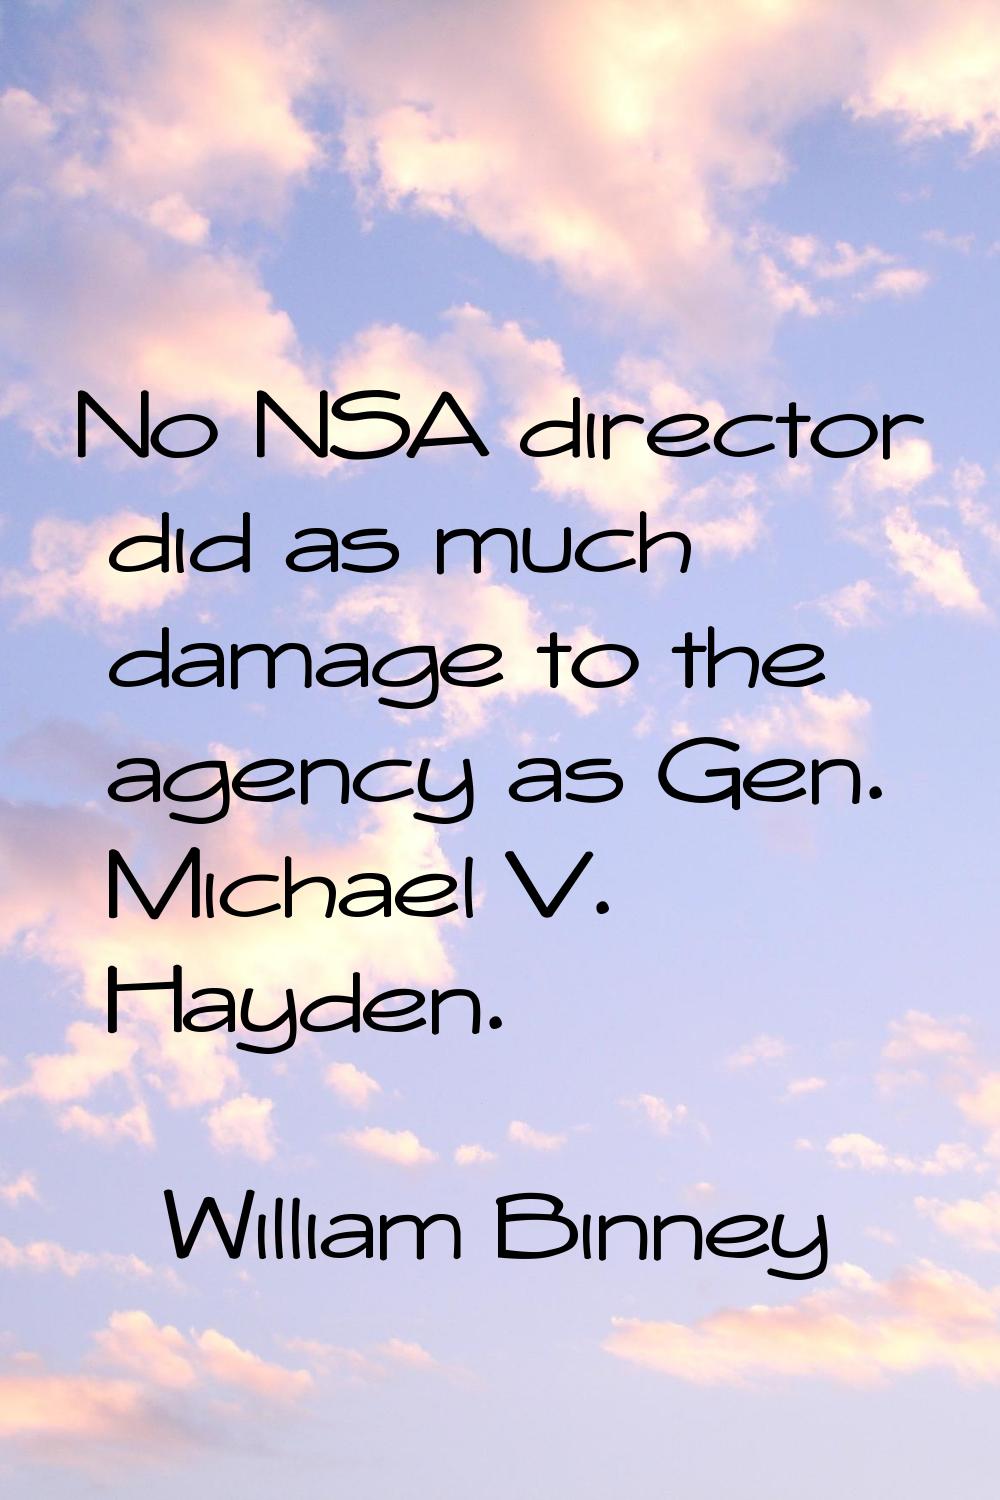 No NSA director did as much damage to the agency as Gen. Michael V. Hayden.